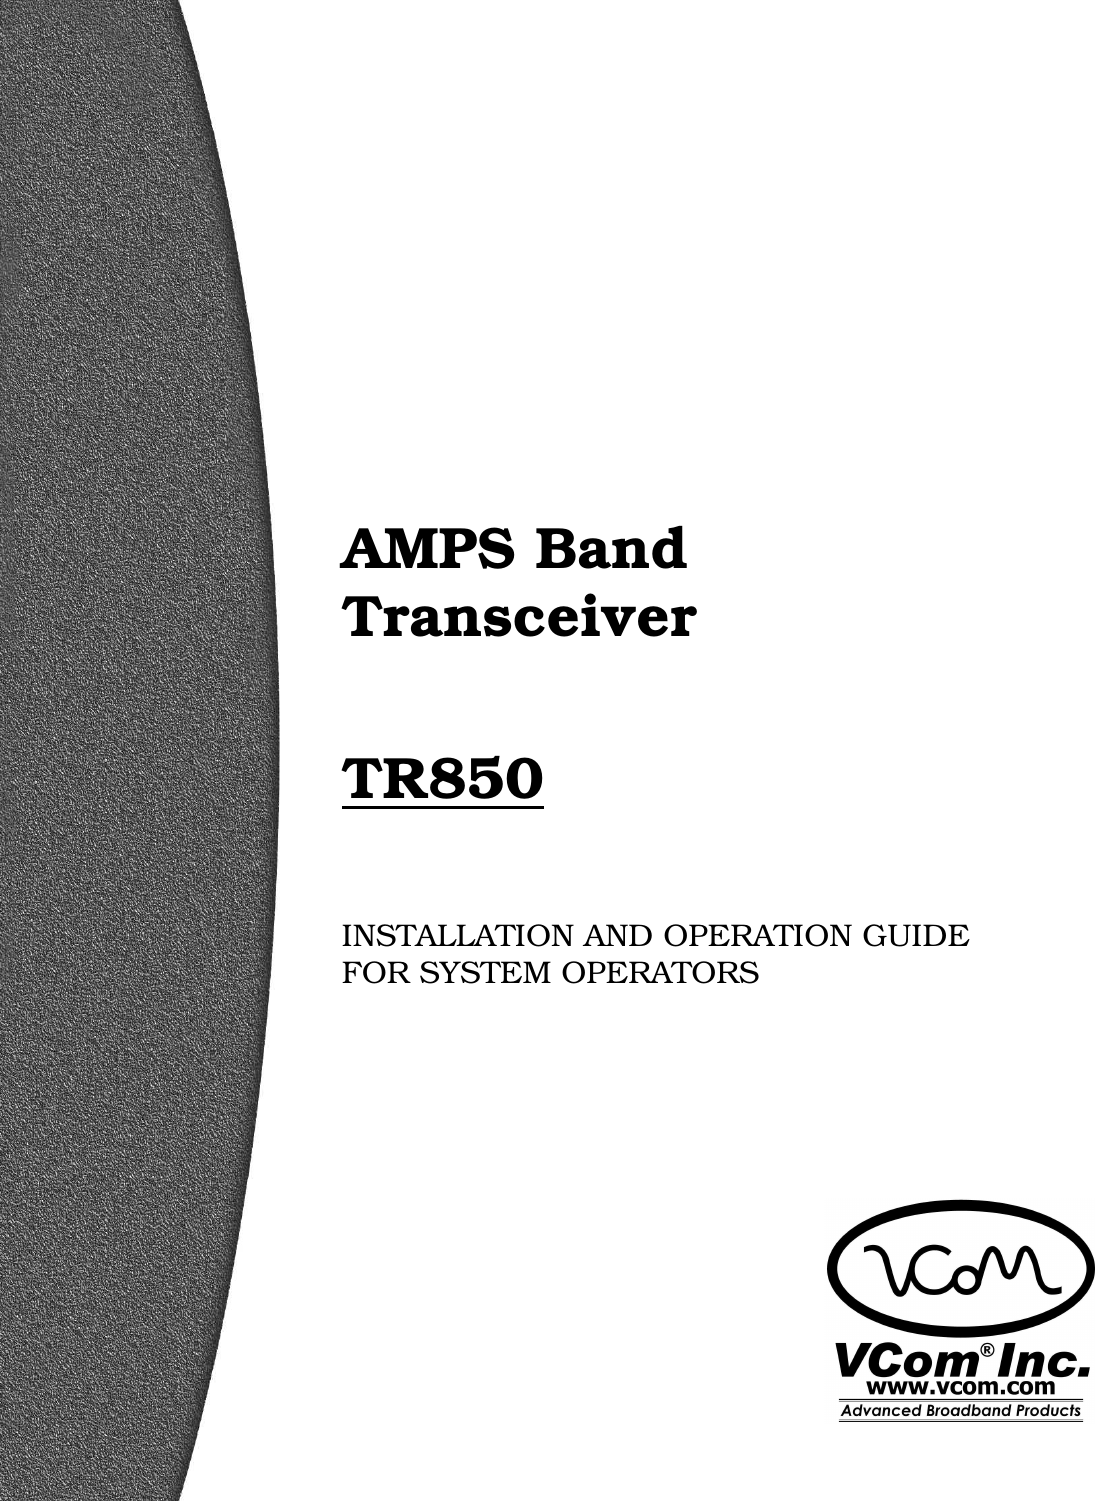                                  AMPS Band Transceiver  TR850   INSTALLATION AND OPERATION GUIDE FOR SYSTEM OPERATORS 